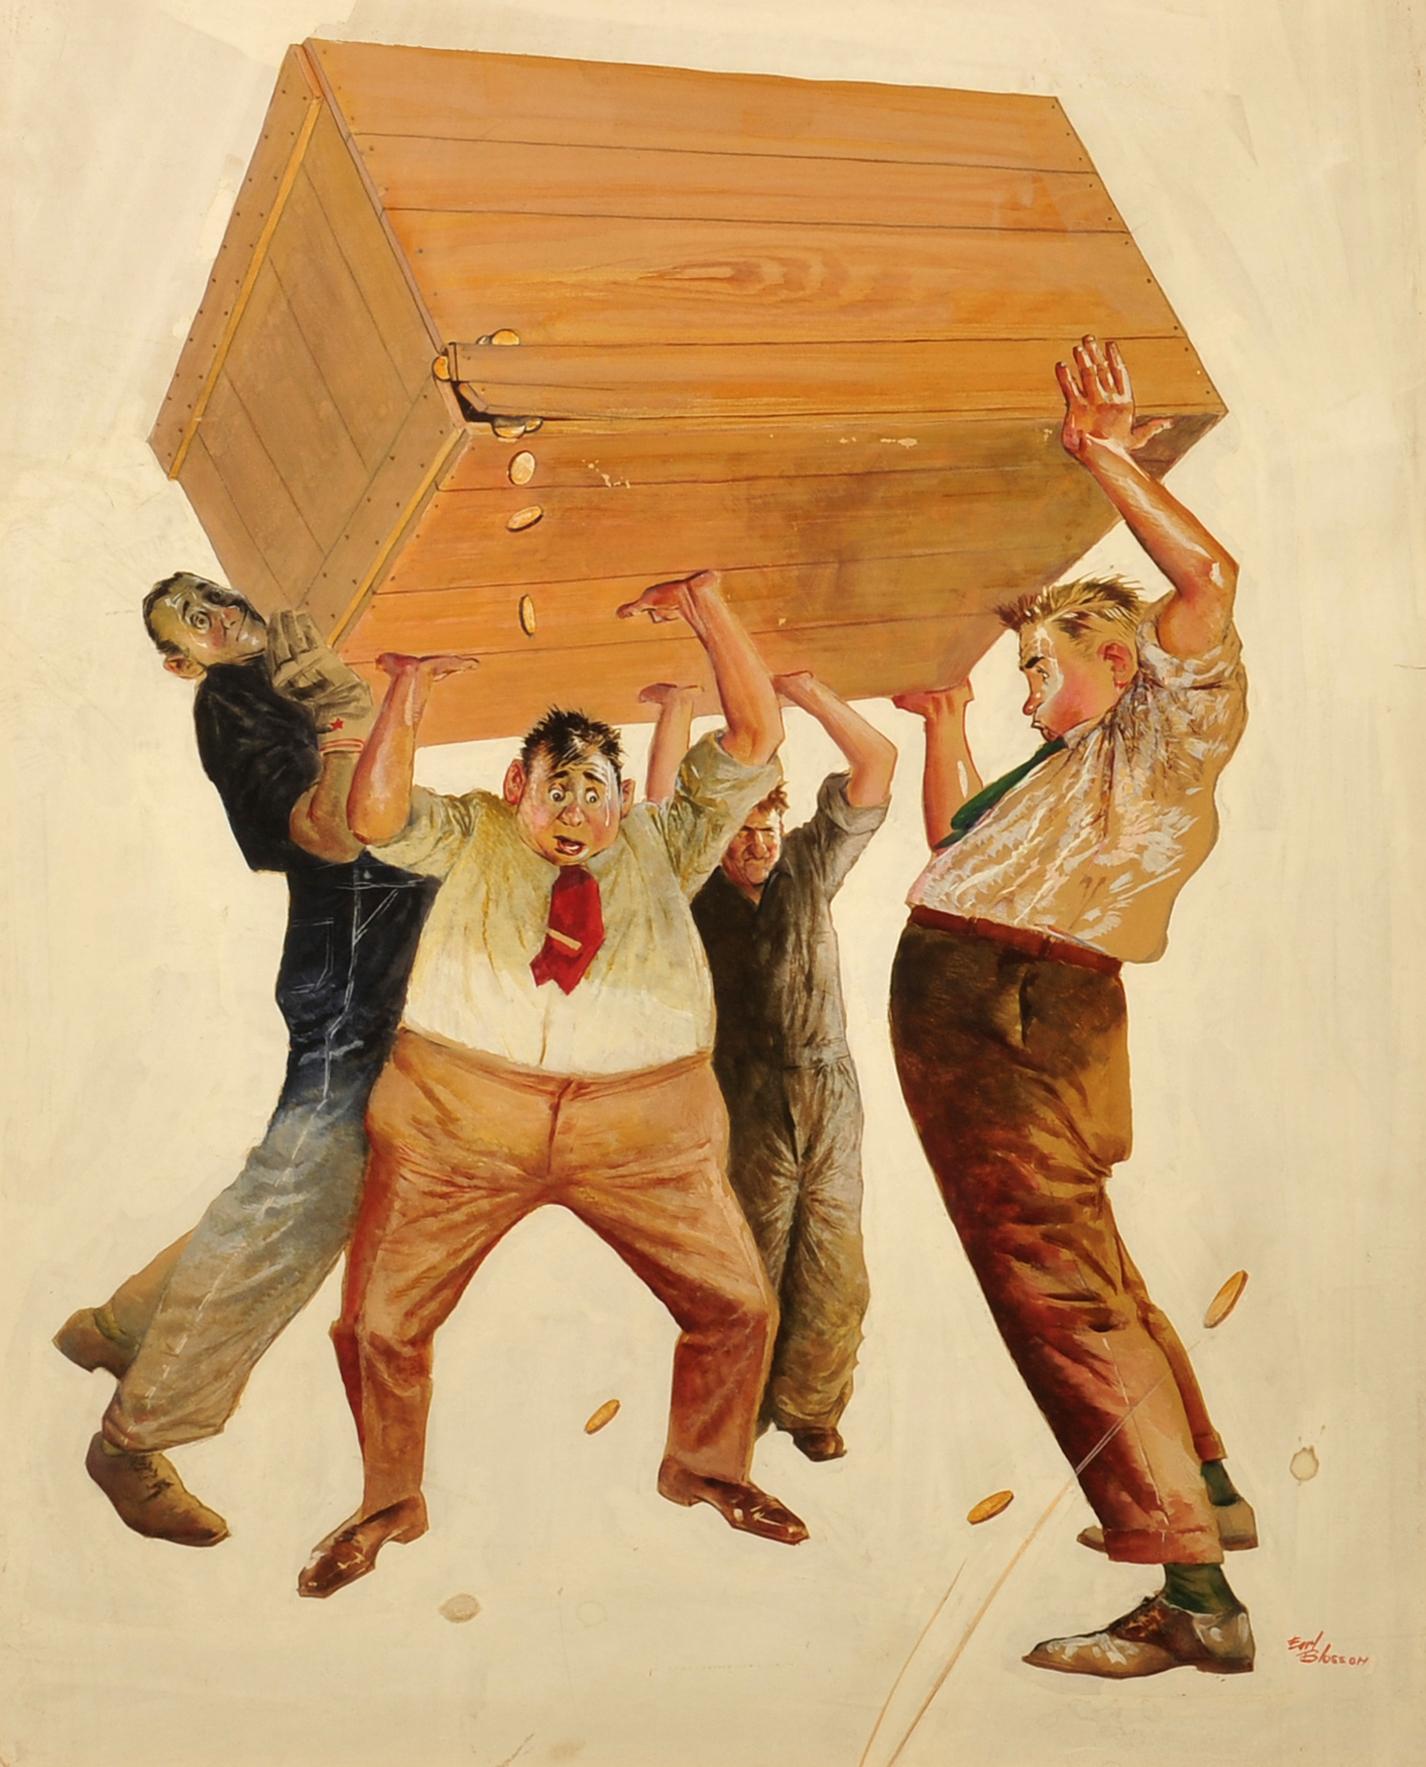 Men Holding Up a Box